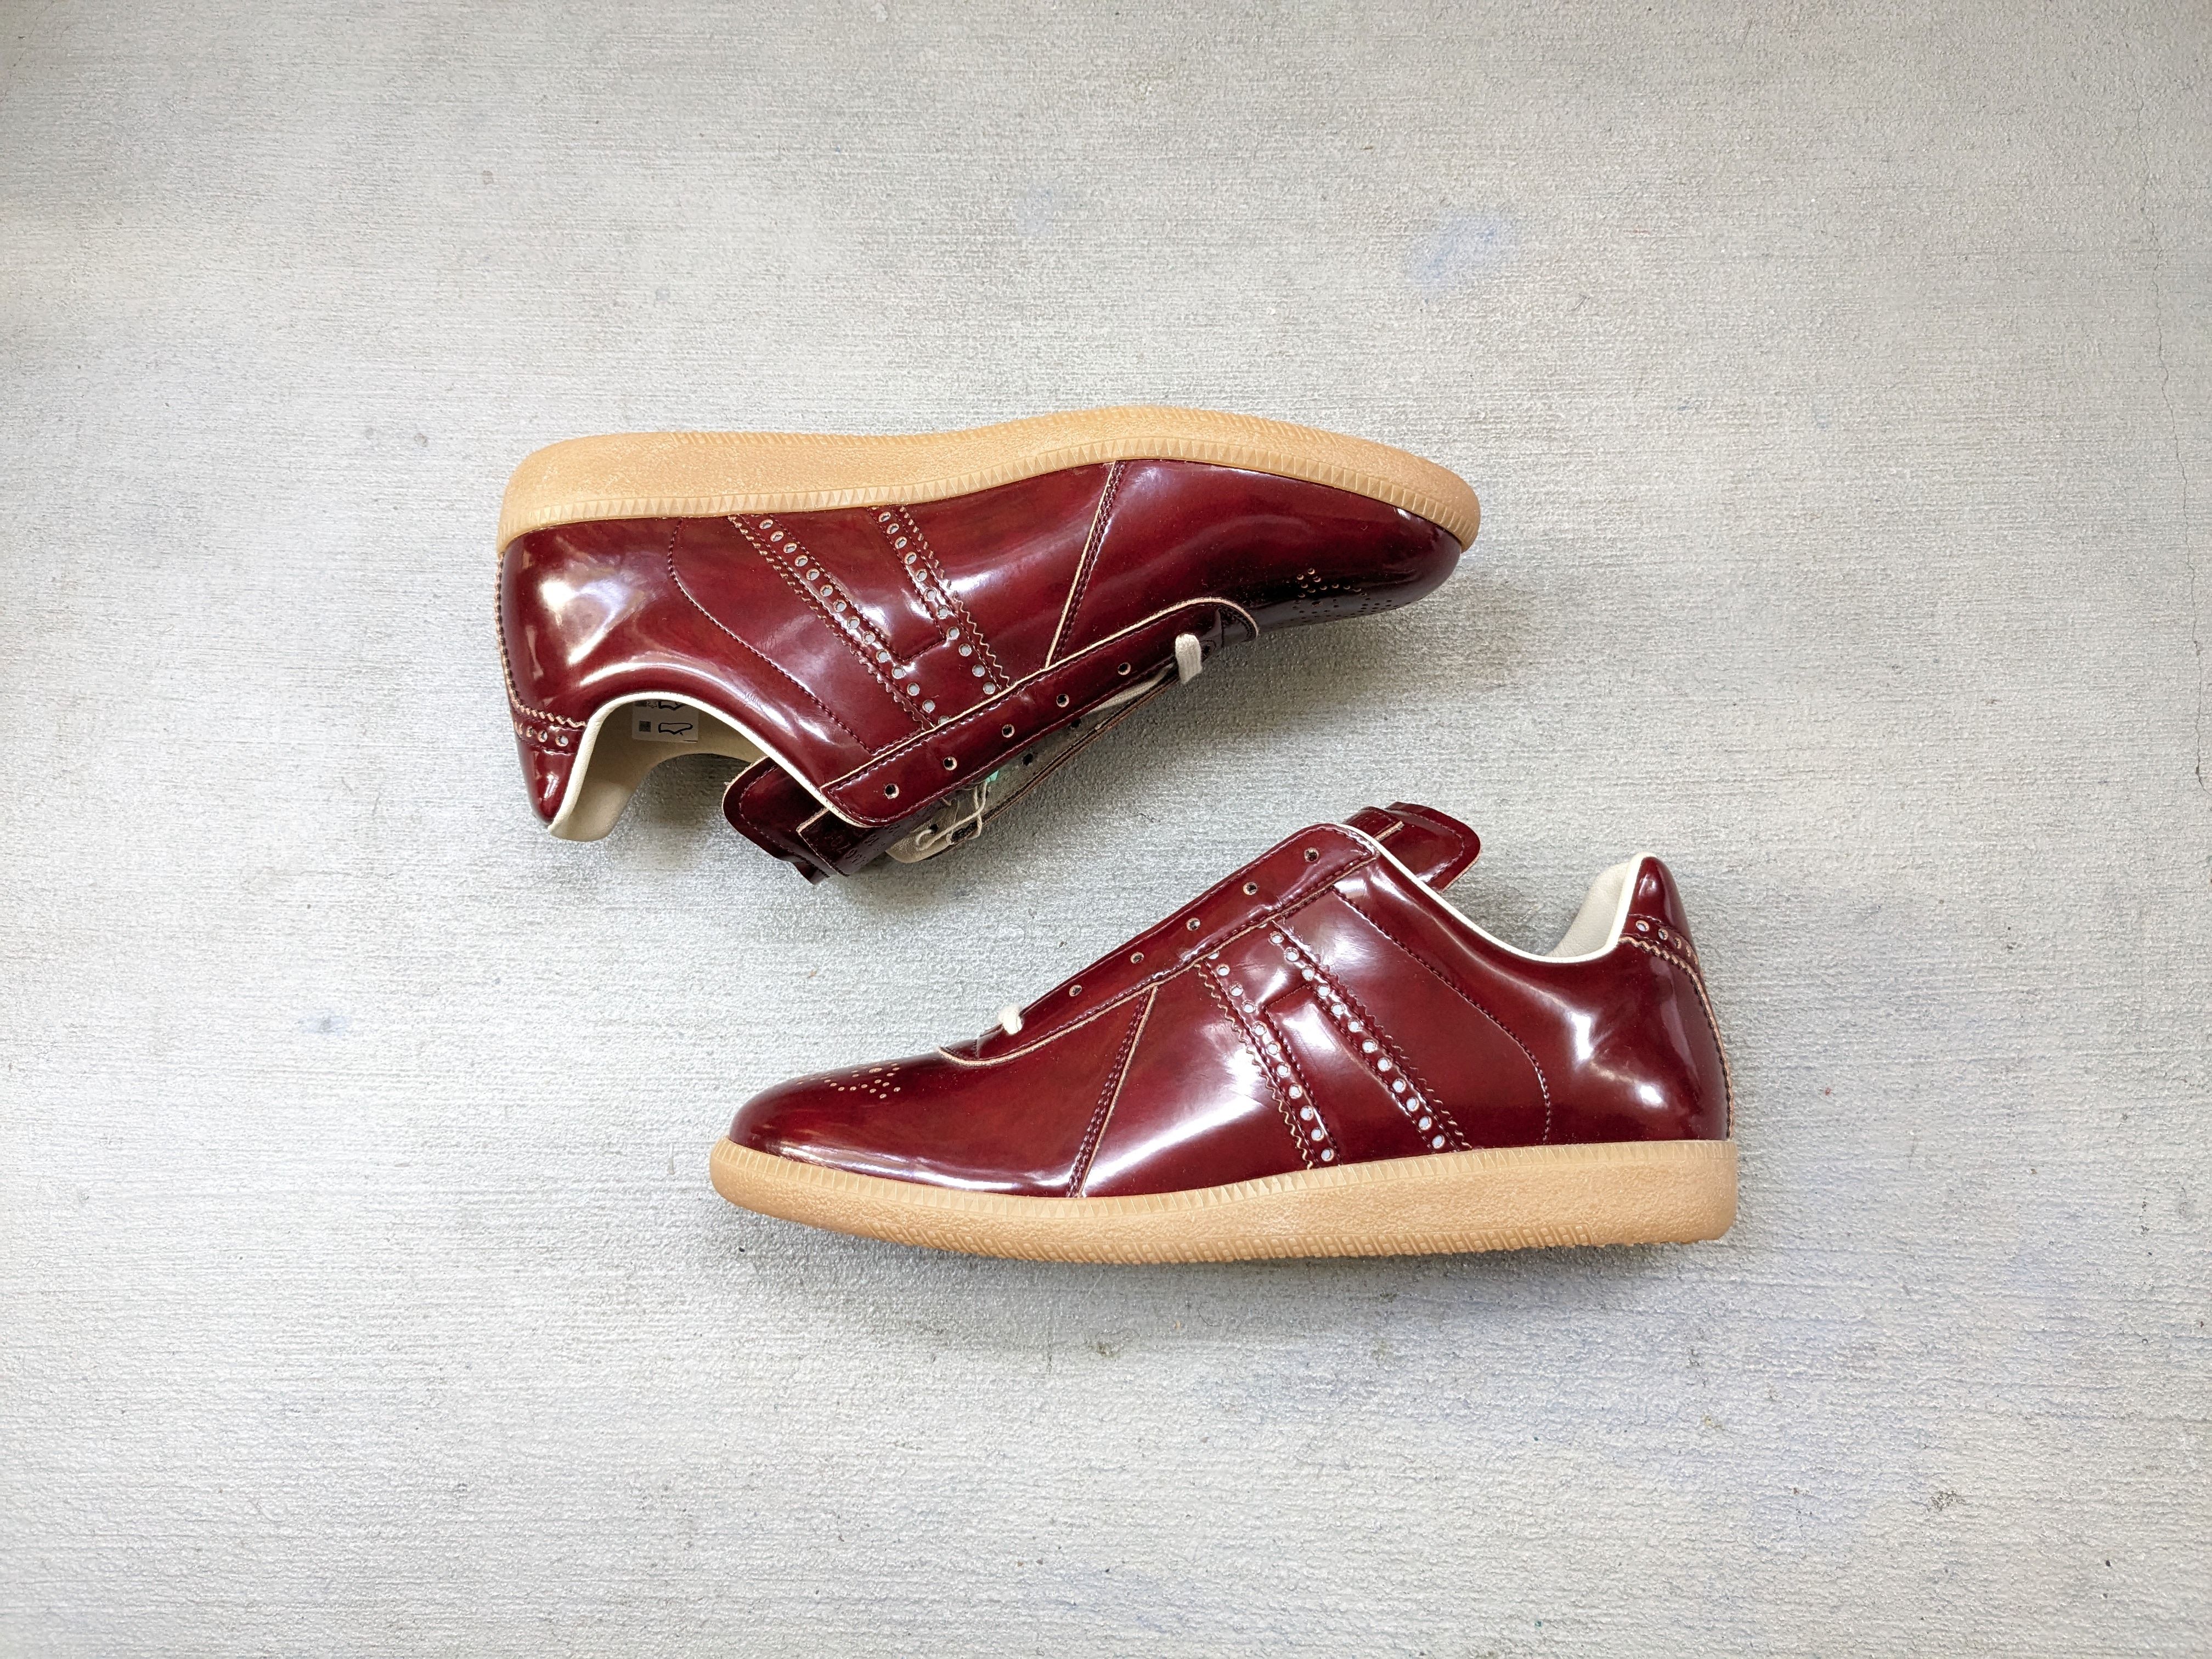 Pre-owned Maison Margiela Gat Replica Burgundy Brogues 9 42 Lows Gum Shoes In Burgundy Red